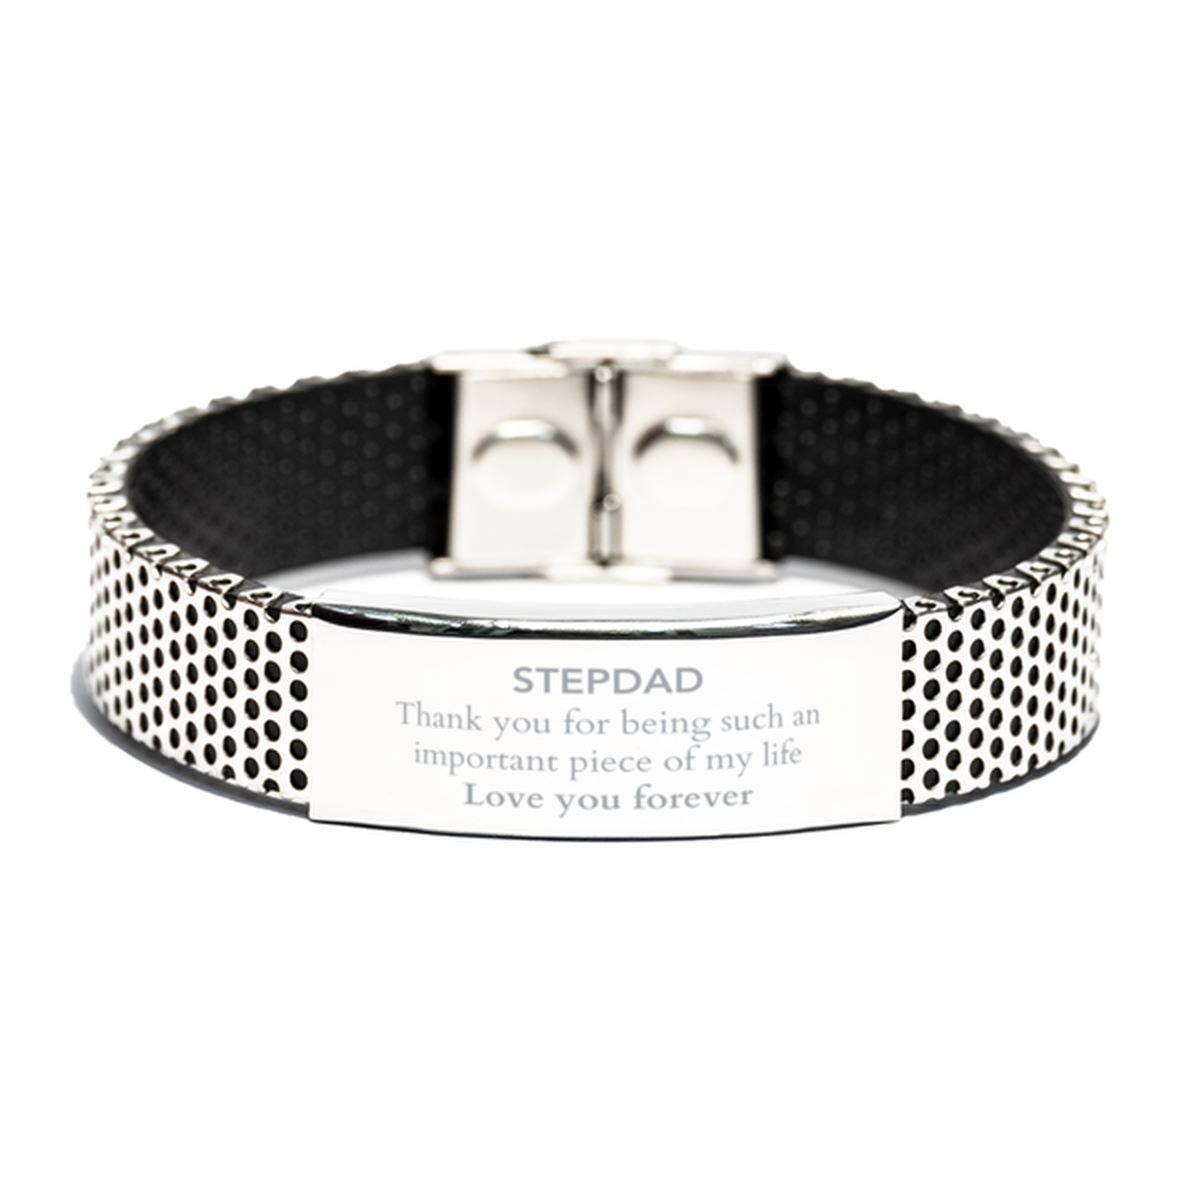 Appropriate Stepdad Stainless Steel Bracelet Epic Birthday Gifts for Stepdad Thank you for being such an important piece of my life Stepdad Christmas Mothers Fathers Day